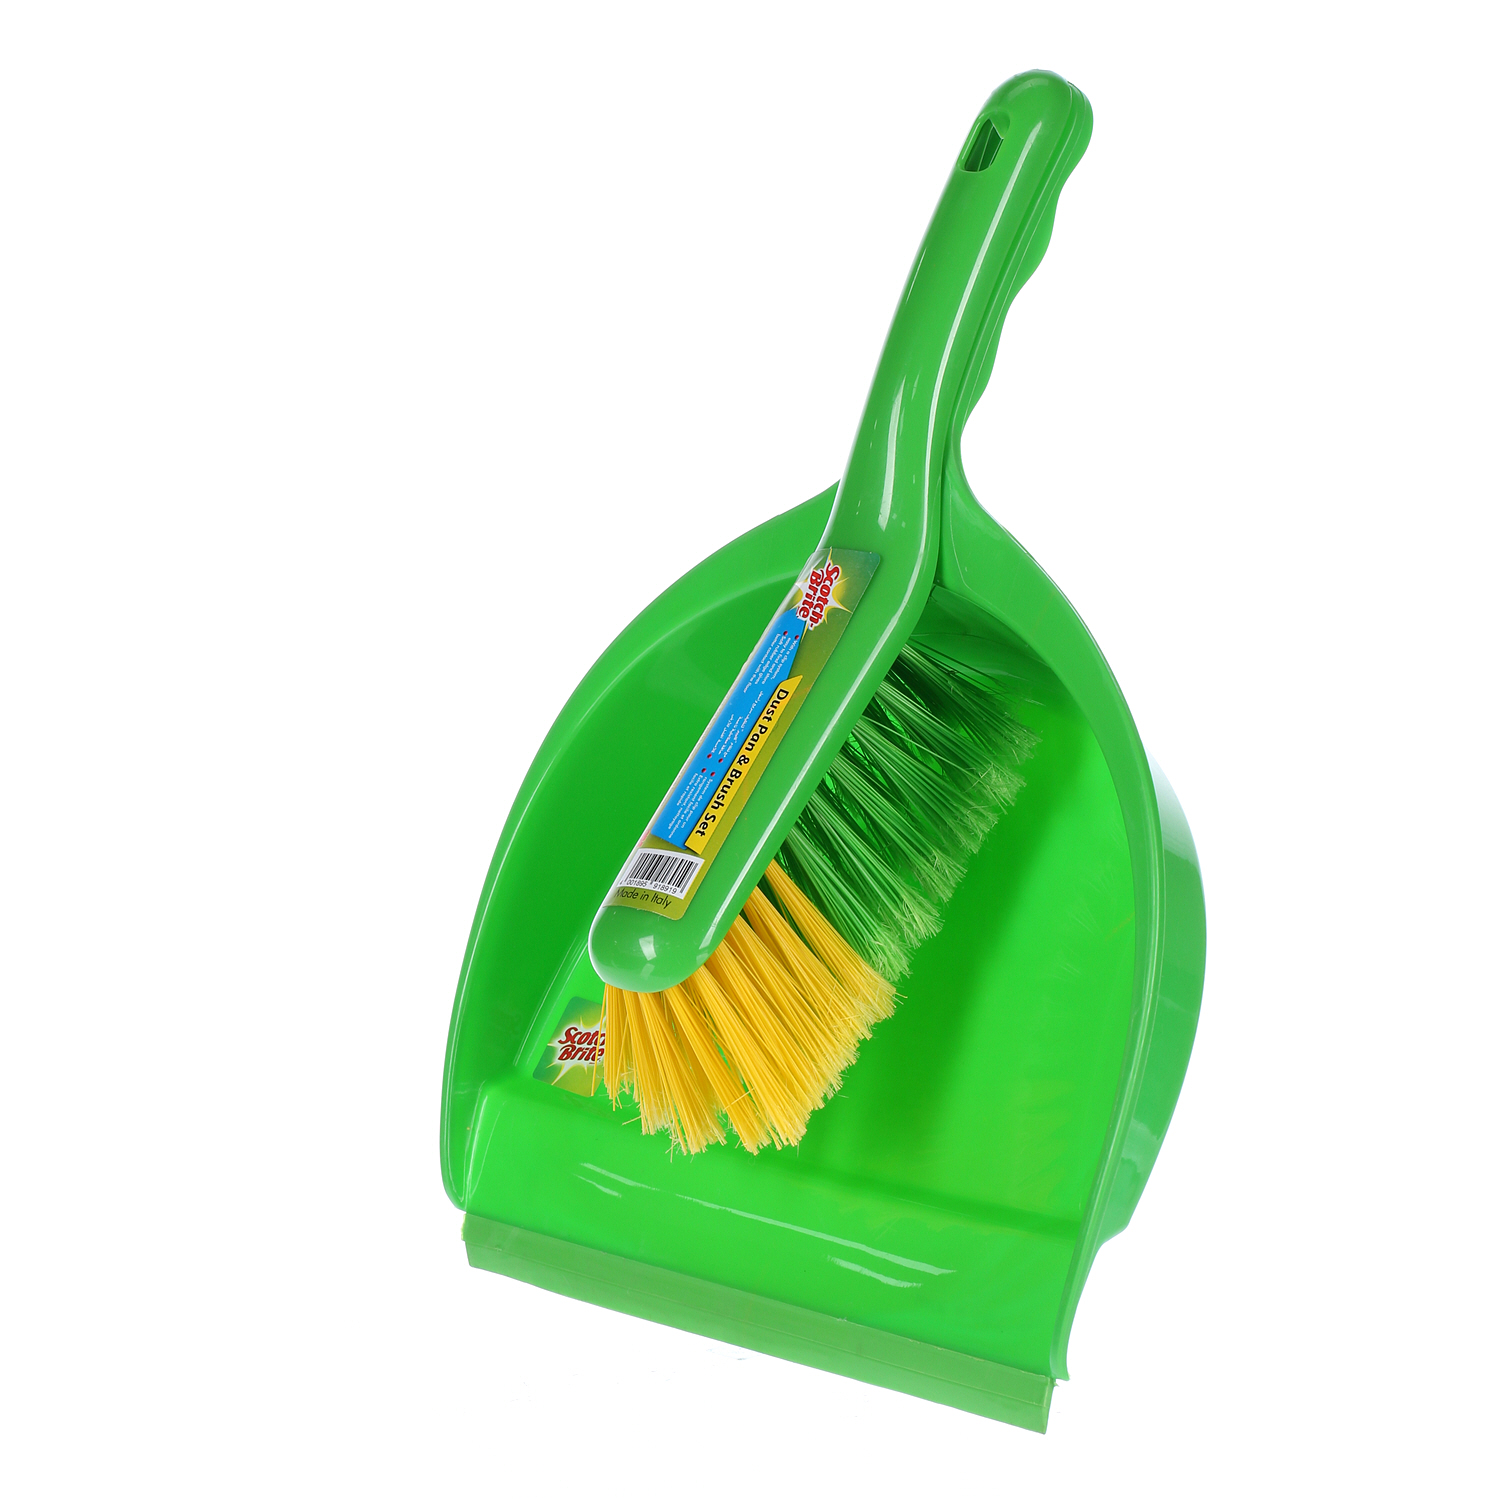 3M Scotch Brite Dust Pan Brush with Rubber